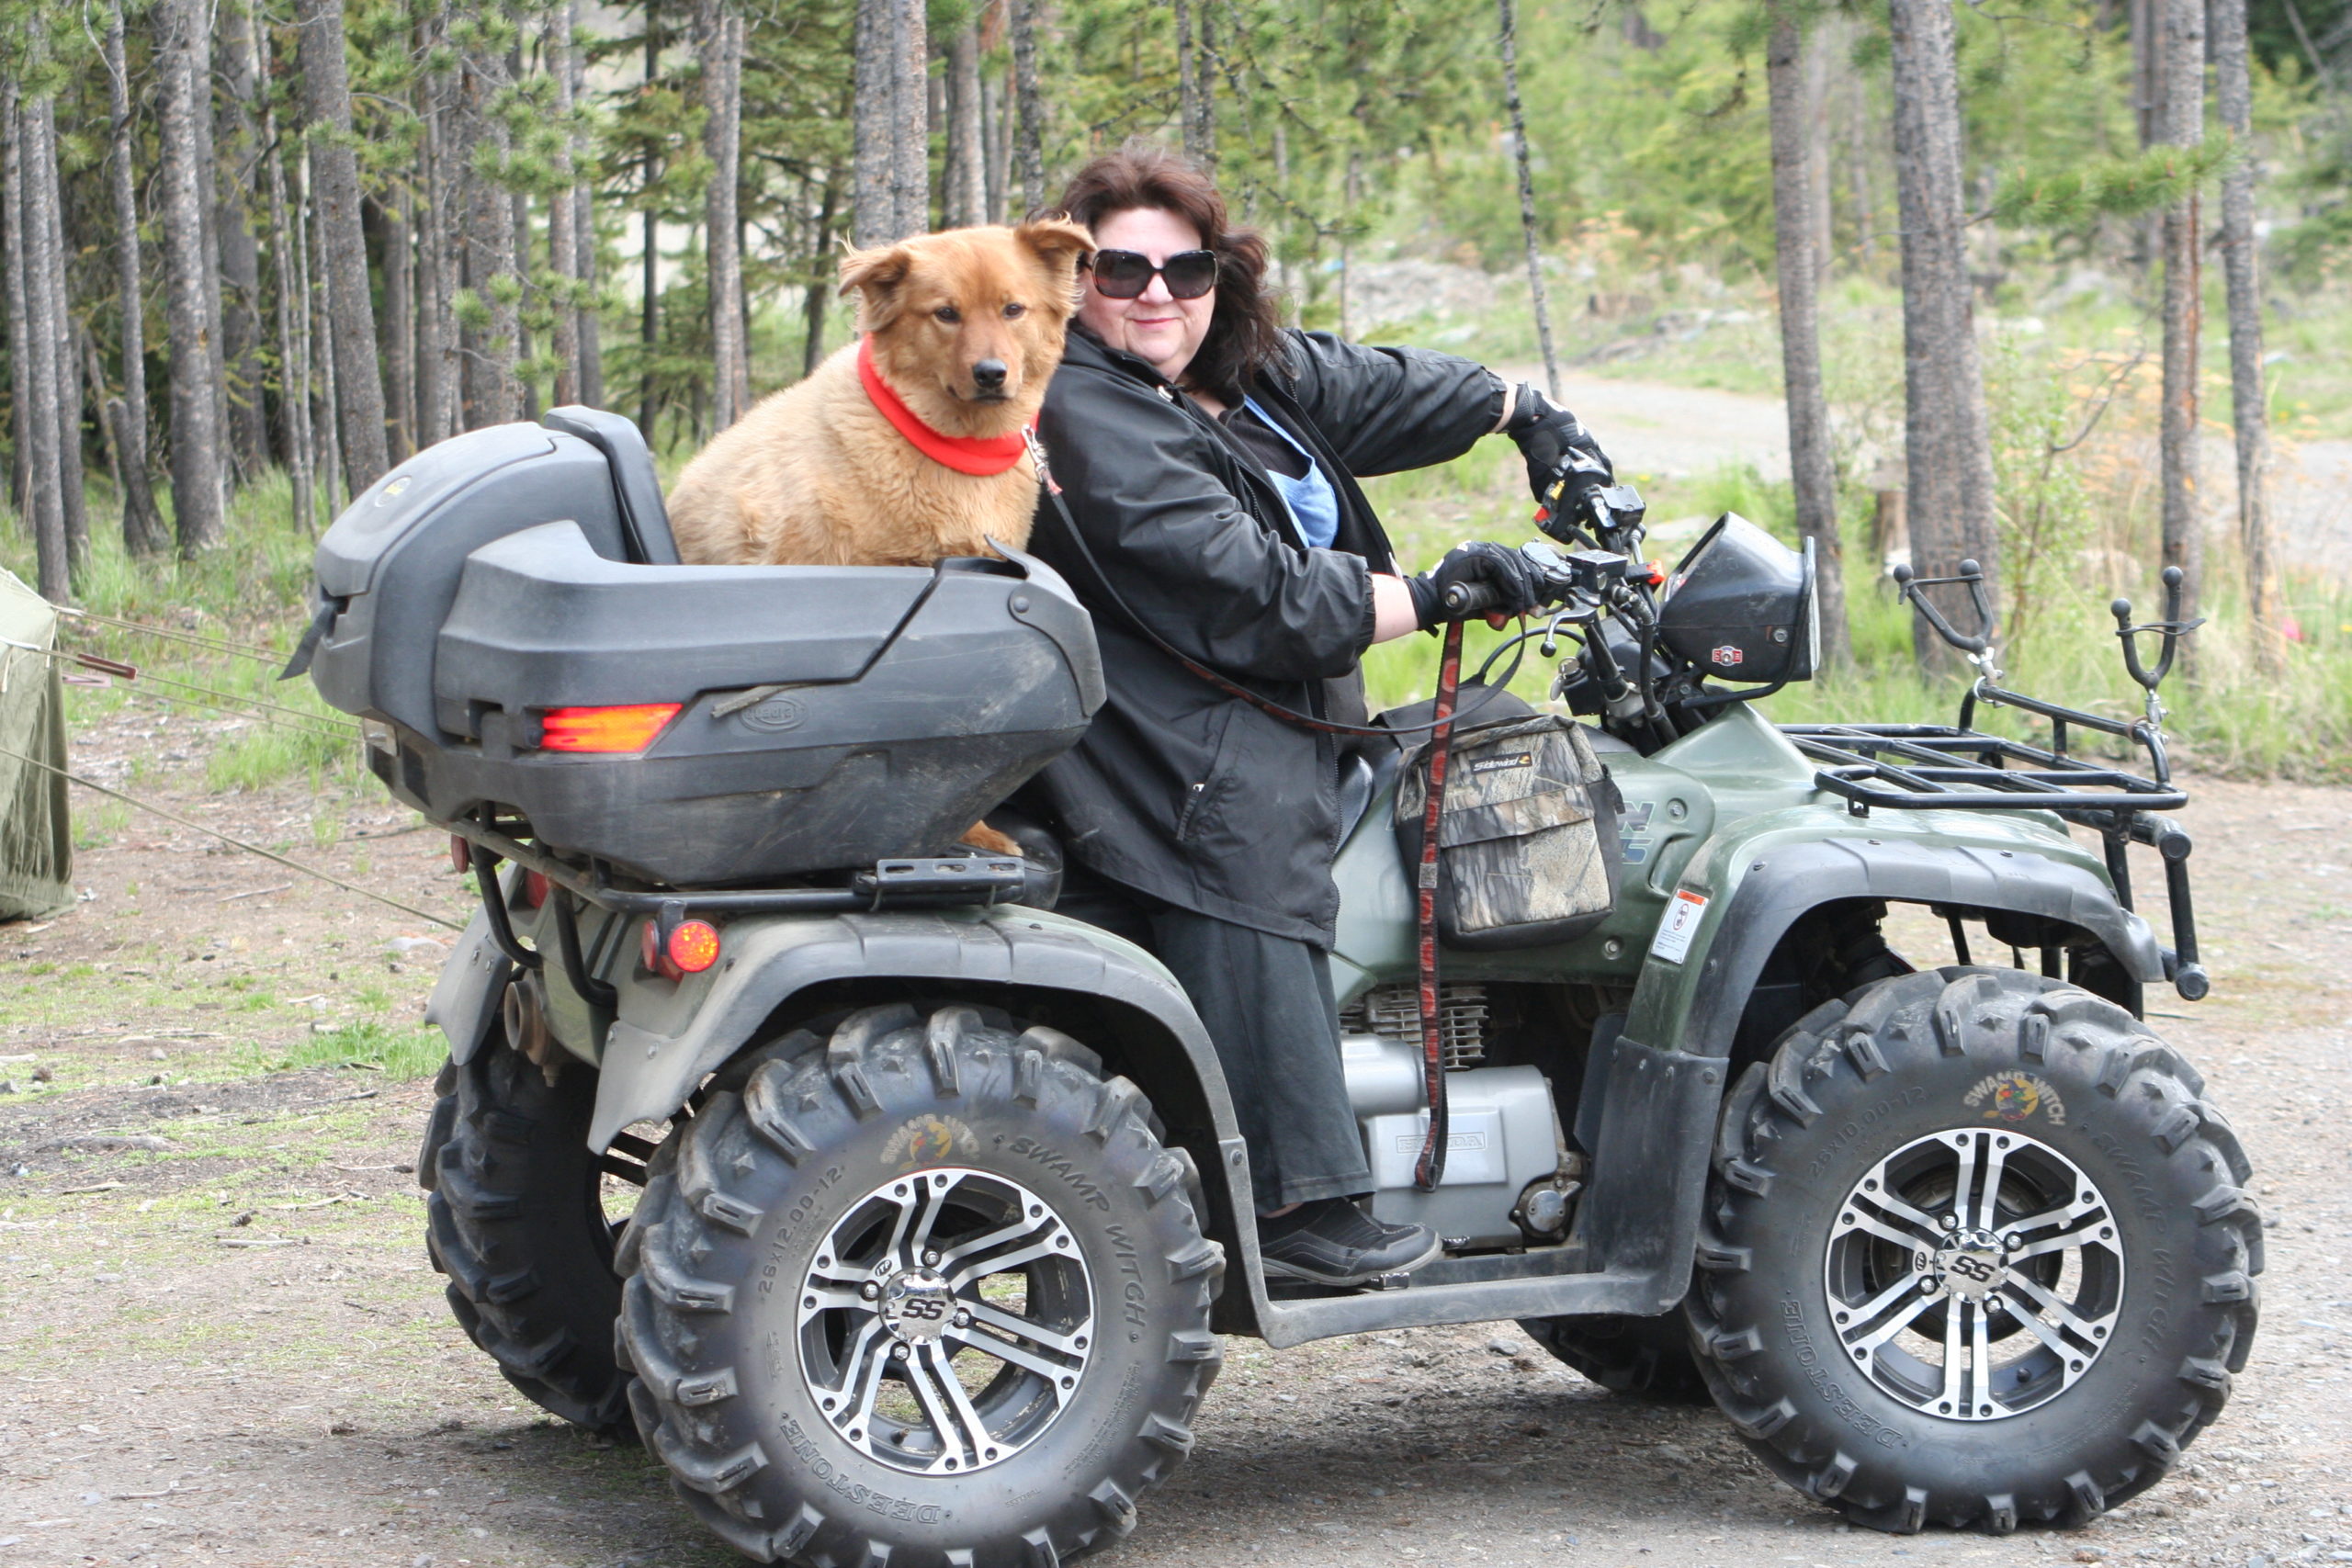 Corey on an ATV with puppy